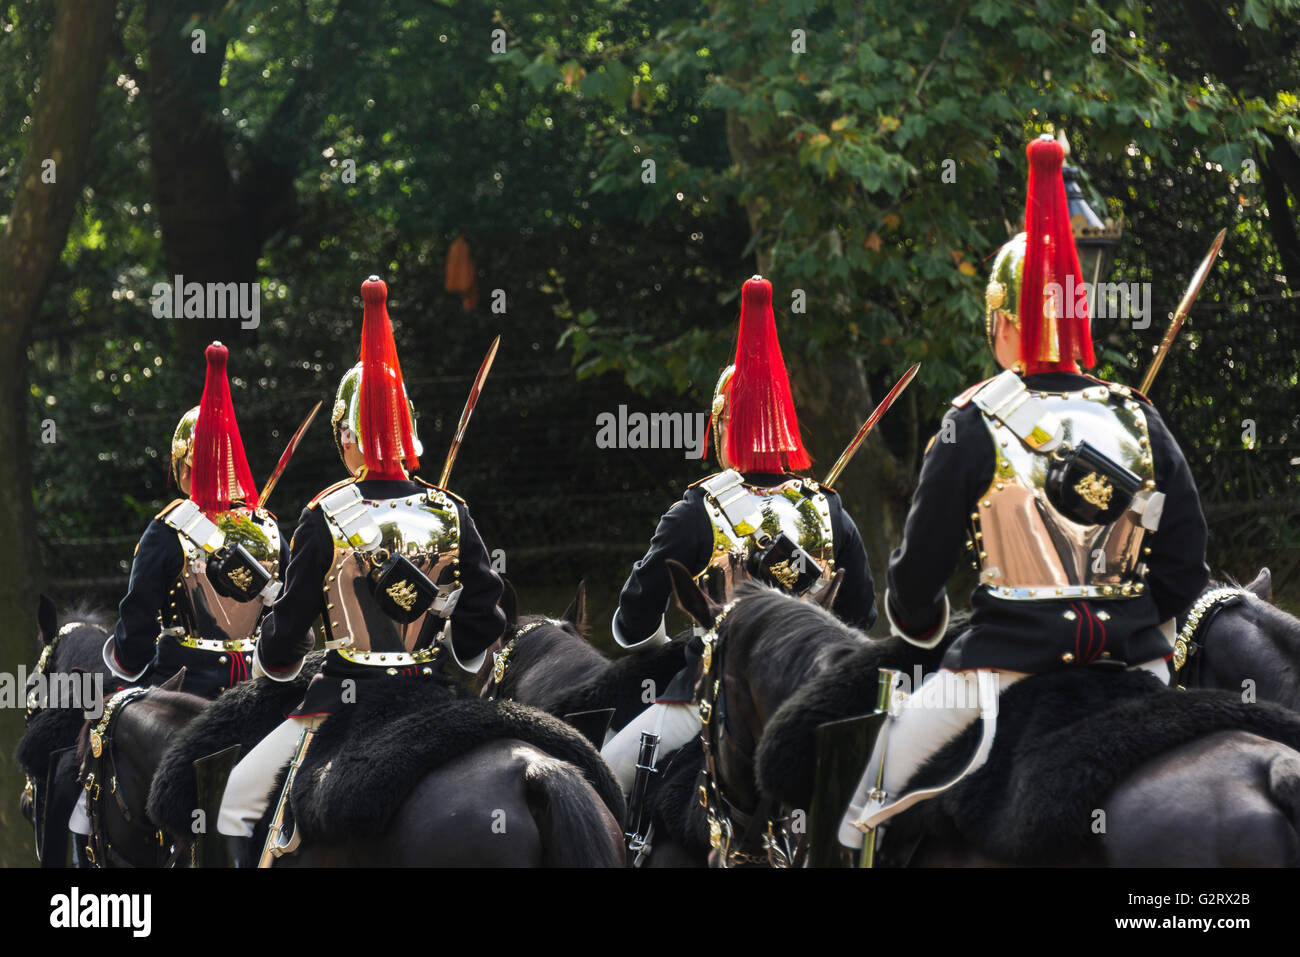 A Close-up of four of the Royal Army soldiers and their gear, riding to Buckingham Palace, London, England. Stock Photo